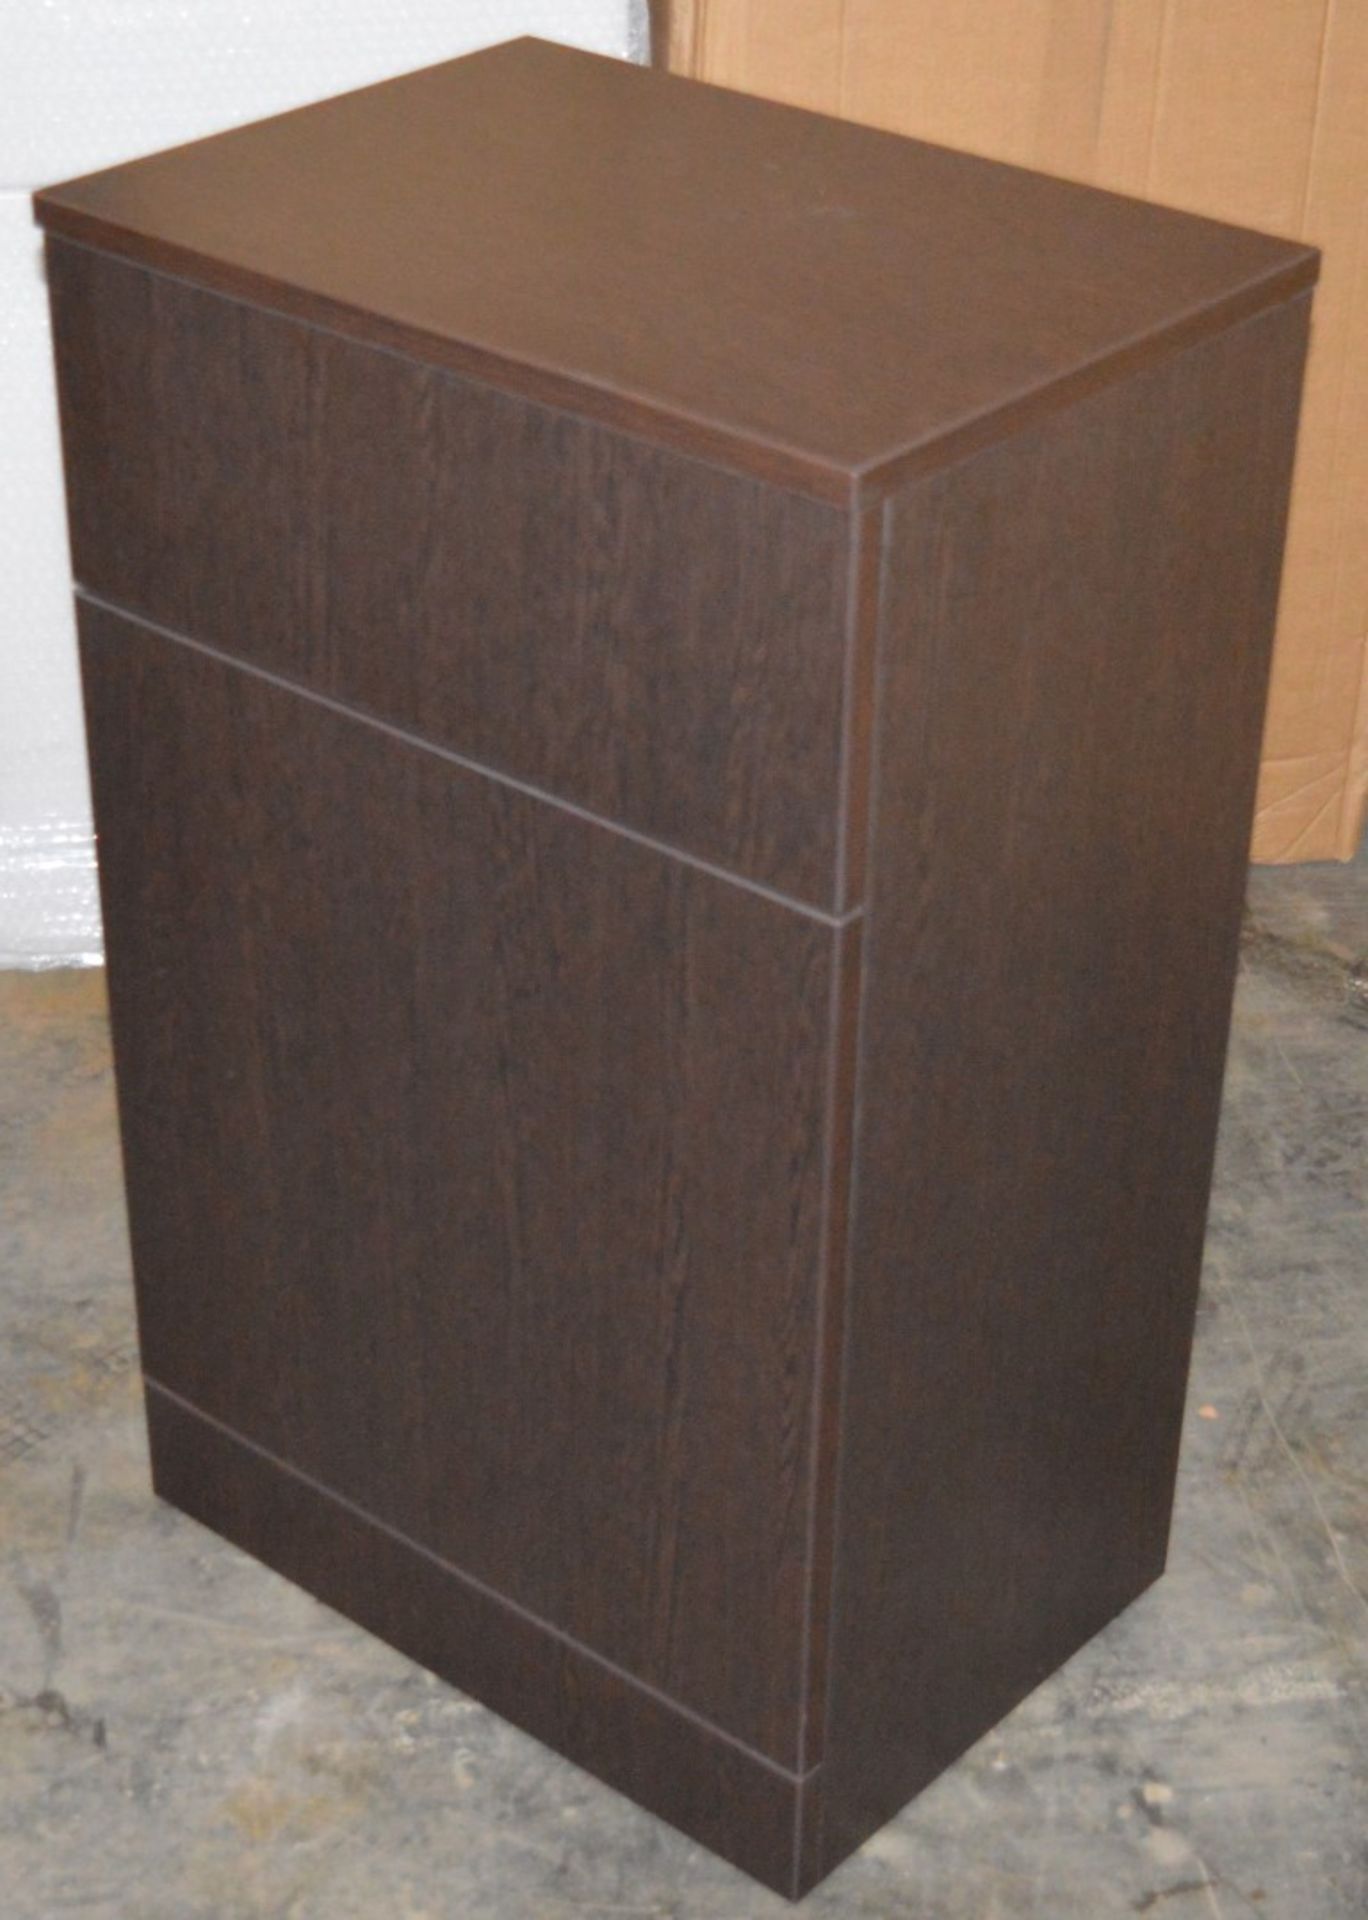 1 x Venizia BTW Toilet Pan Unit in Wenge With Concealed Cistern - 500mm Width - Includes Push Button - Image 6 of 7